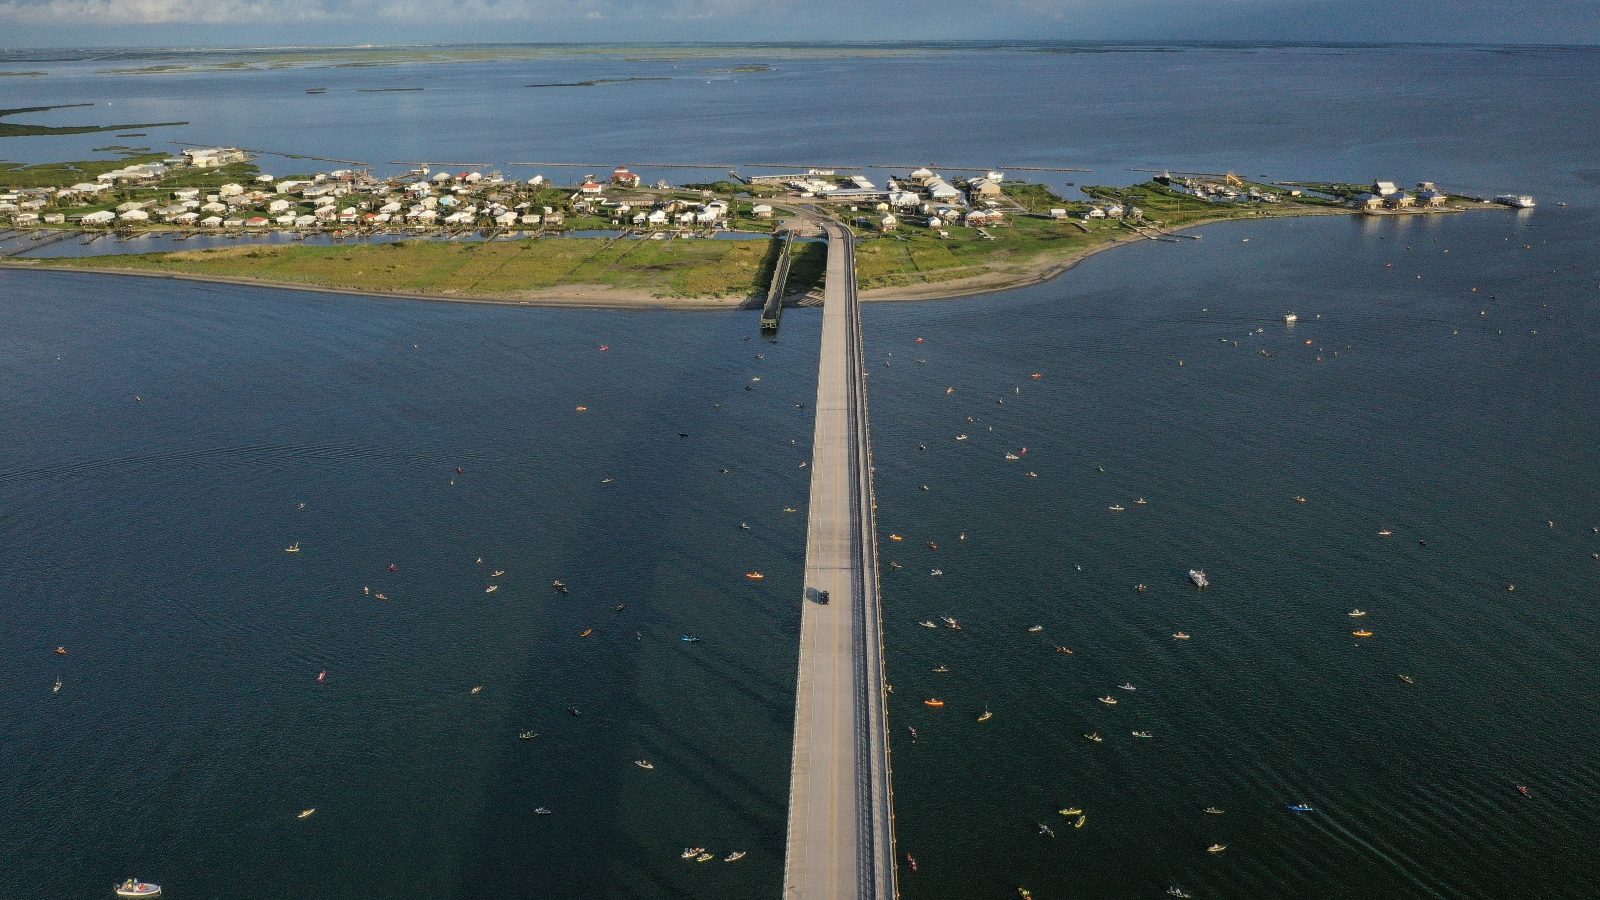 An aerial photo shows a long bridge leading to a small, precarious-looking island crowded with homes.